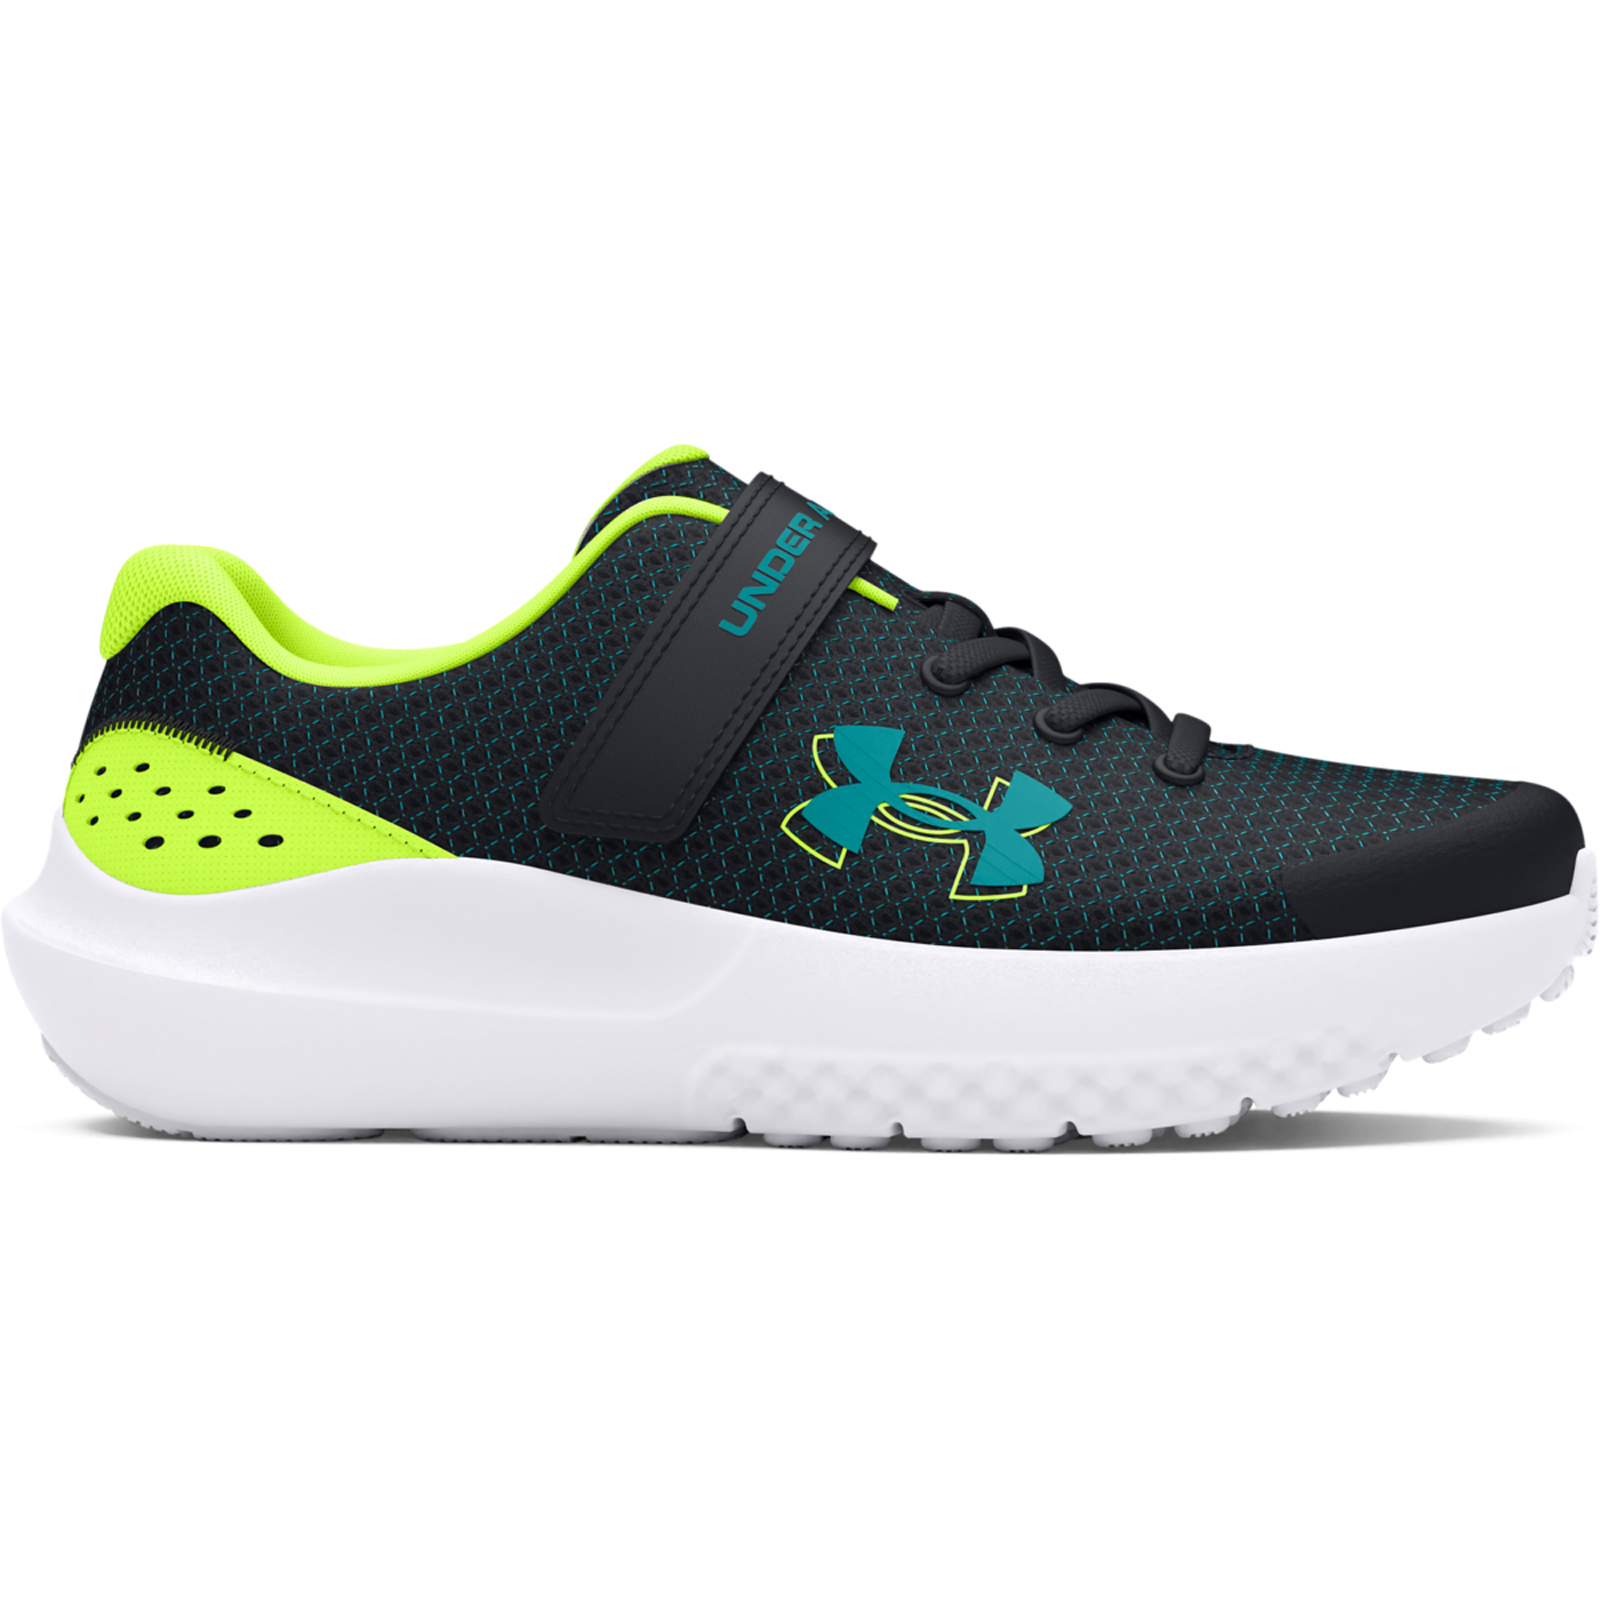 Under Armour - 3027104 UA BPS SURGE 4 AC - Black/High Vis Yellow/Circuit Teal Παιδικά > Παπούτσια > Αθλητικά > Παπούτσι Low Cut